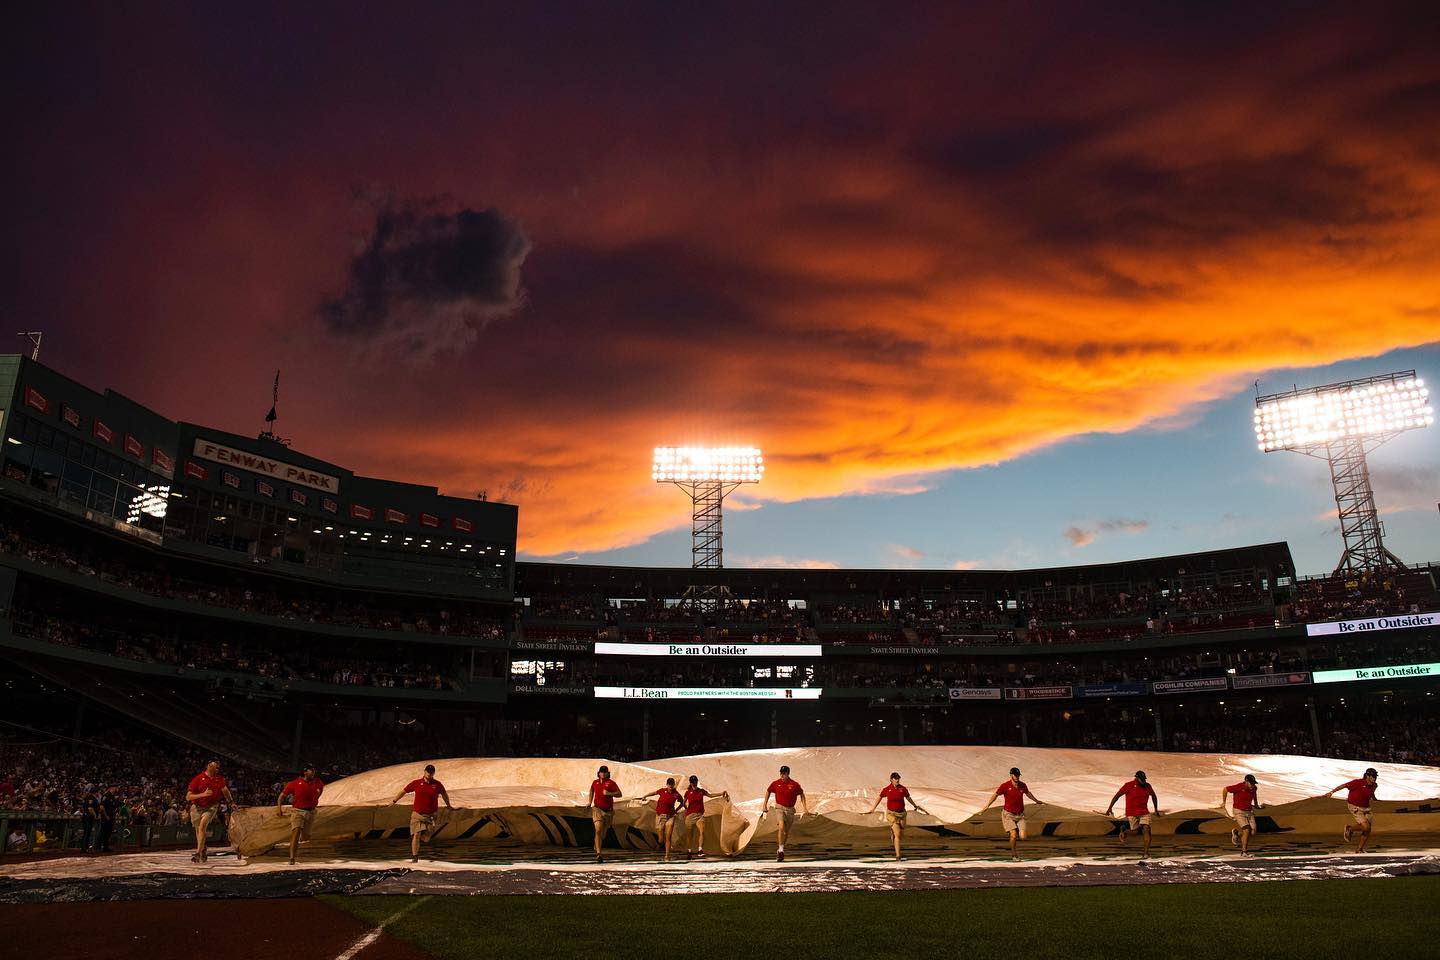 Baseball skies on another level....